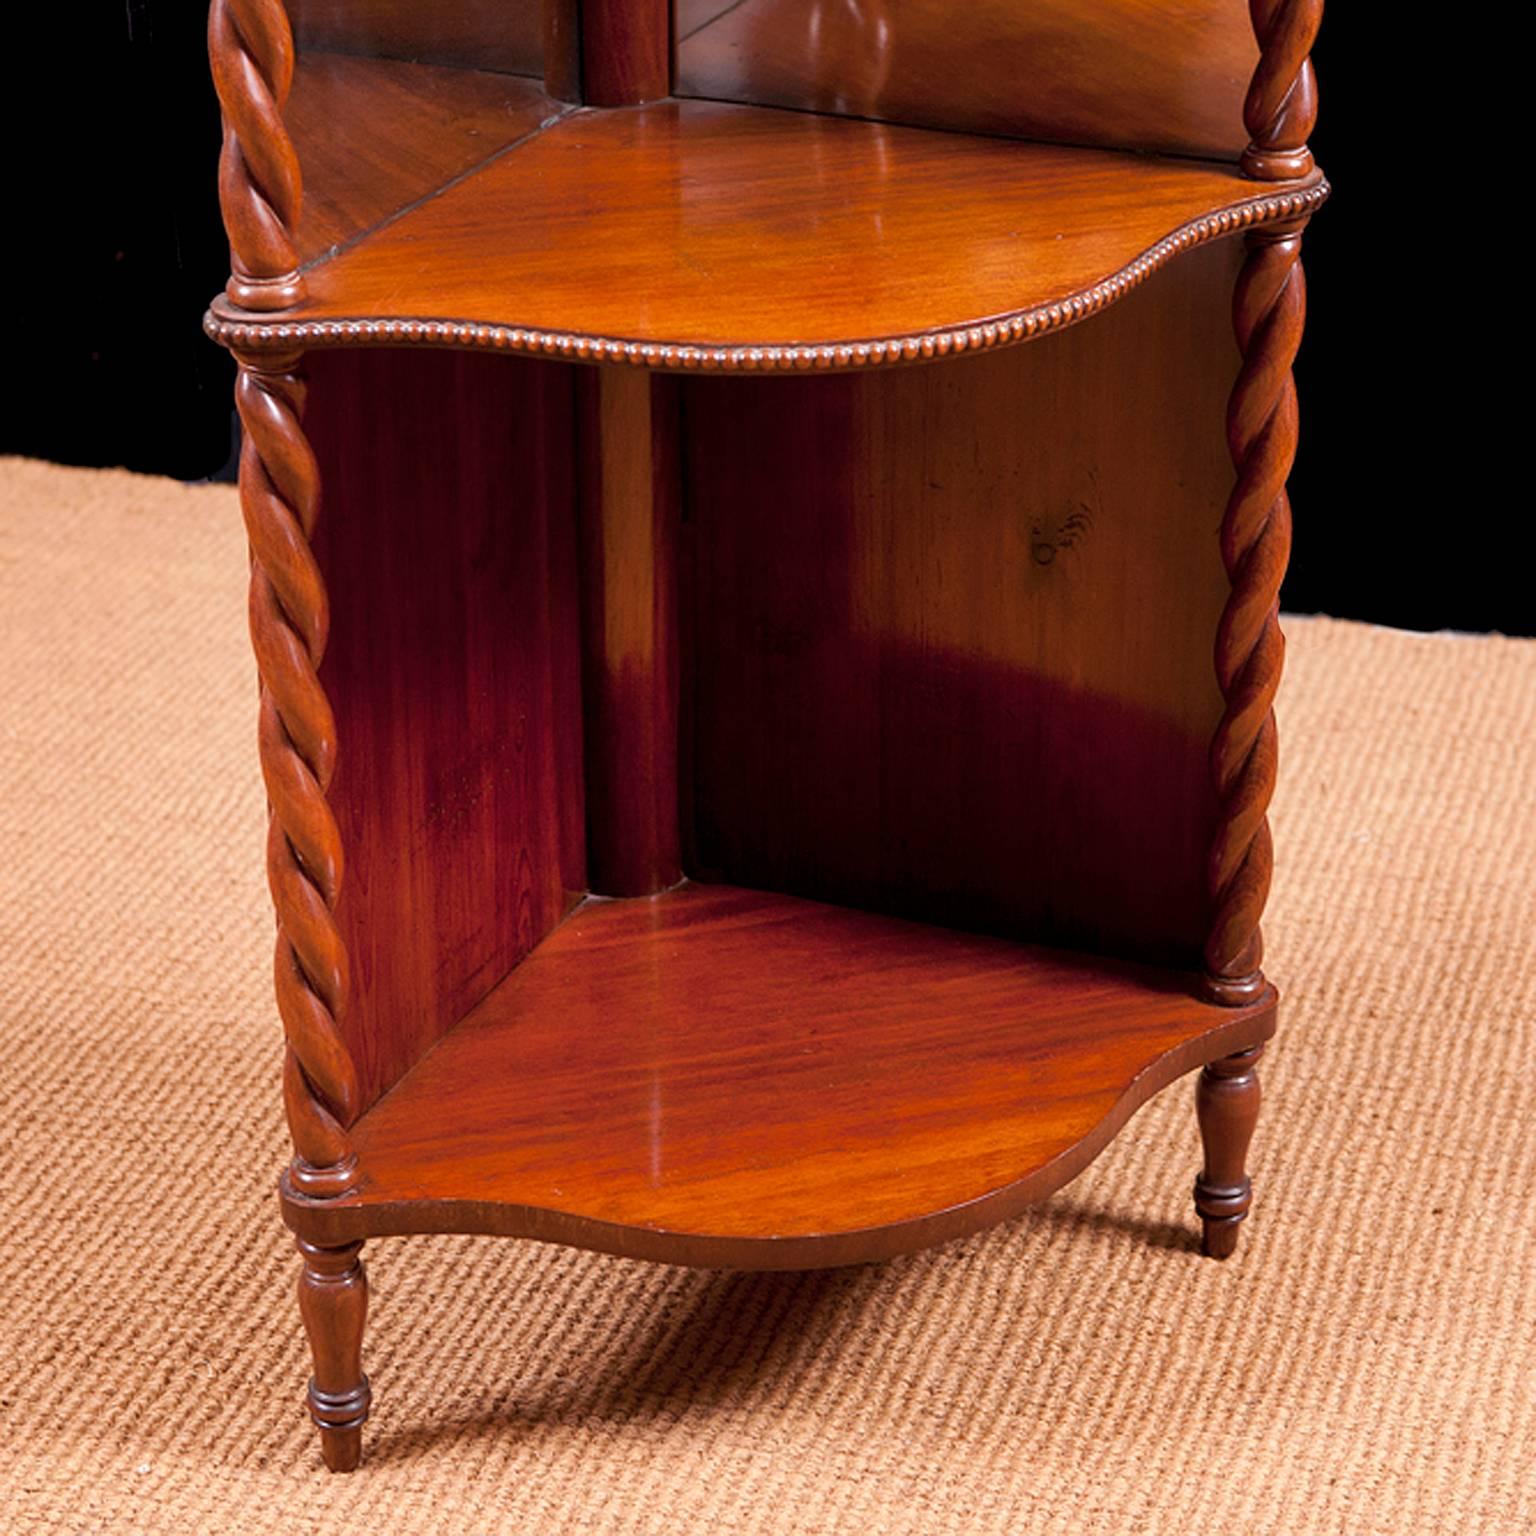 Victorian Corner Étagère in Mahogany with Mirrored Back Panels, Denmark, circa 1835